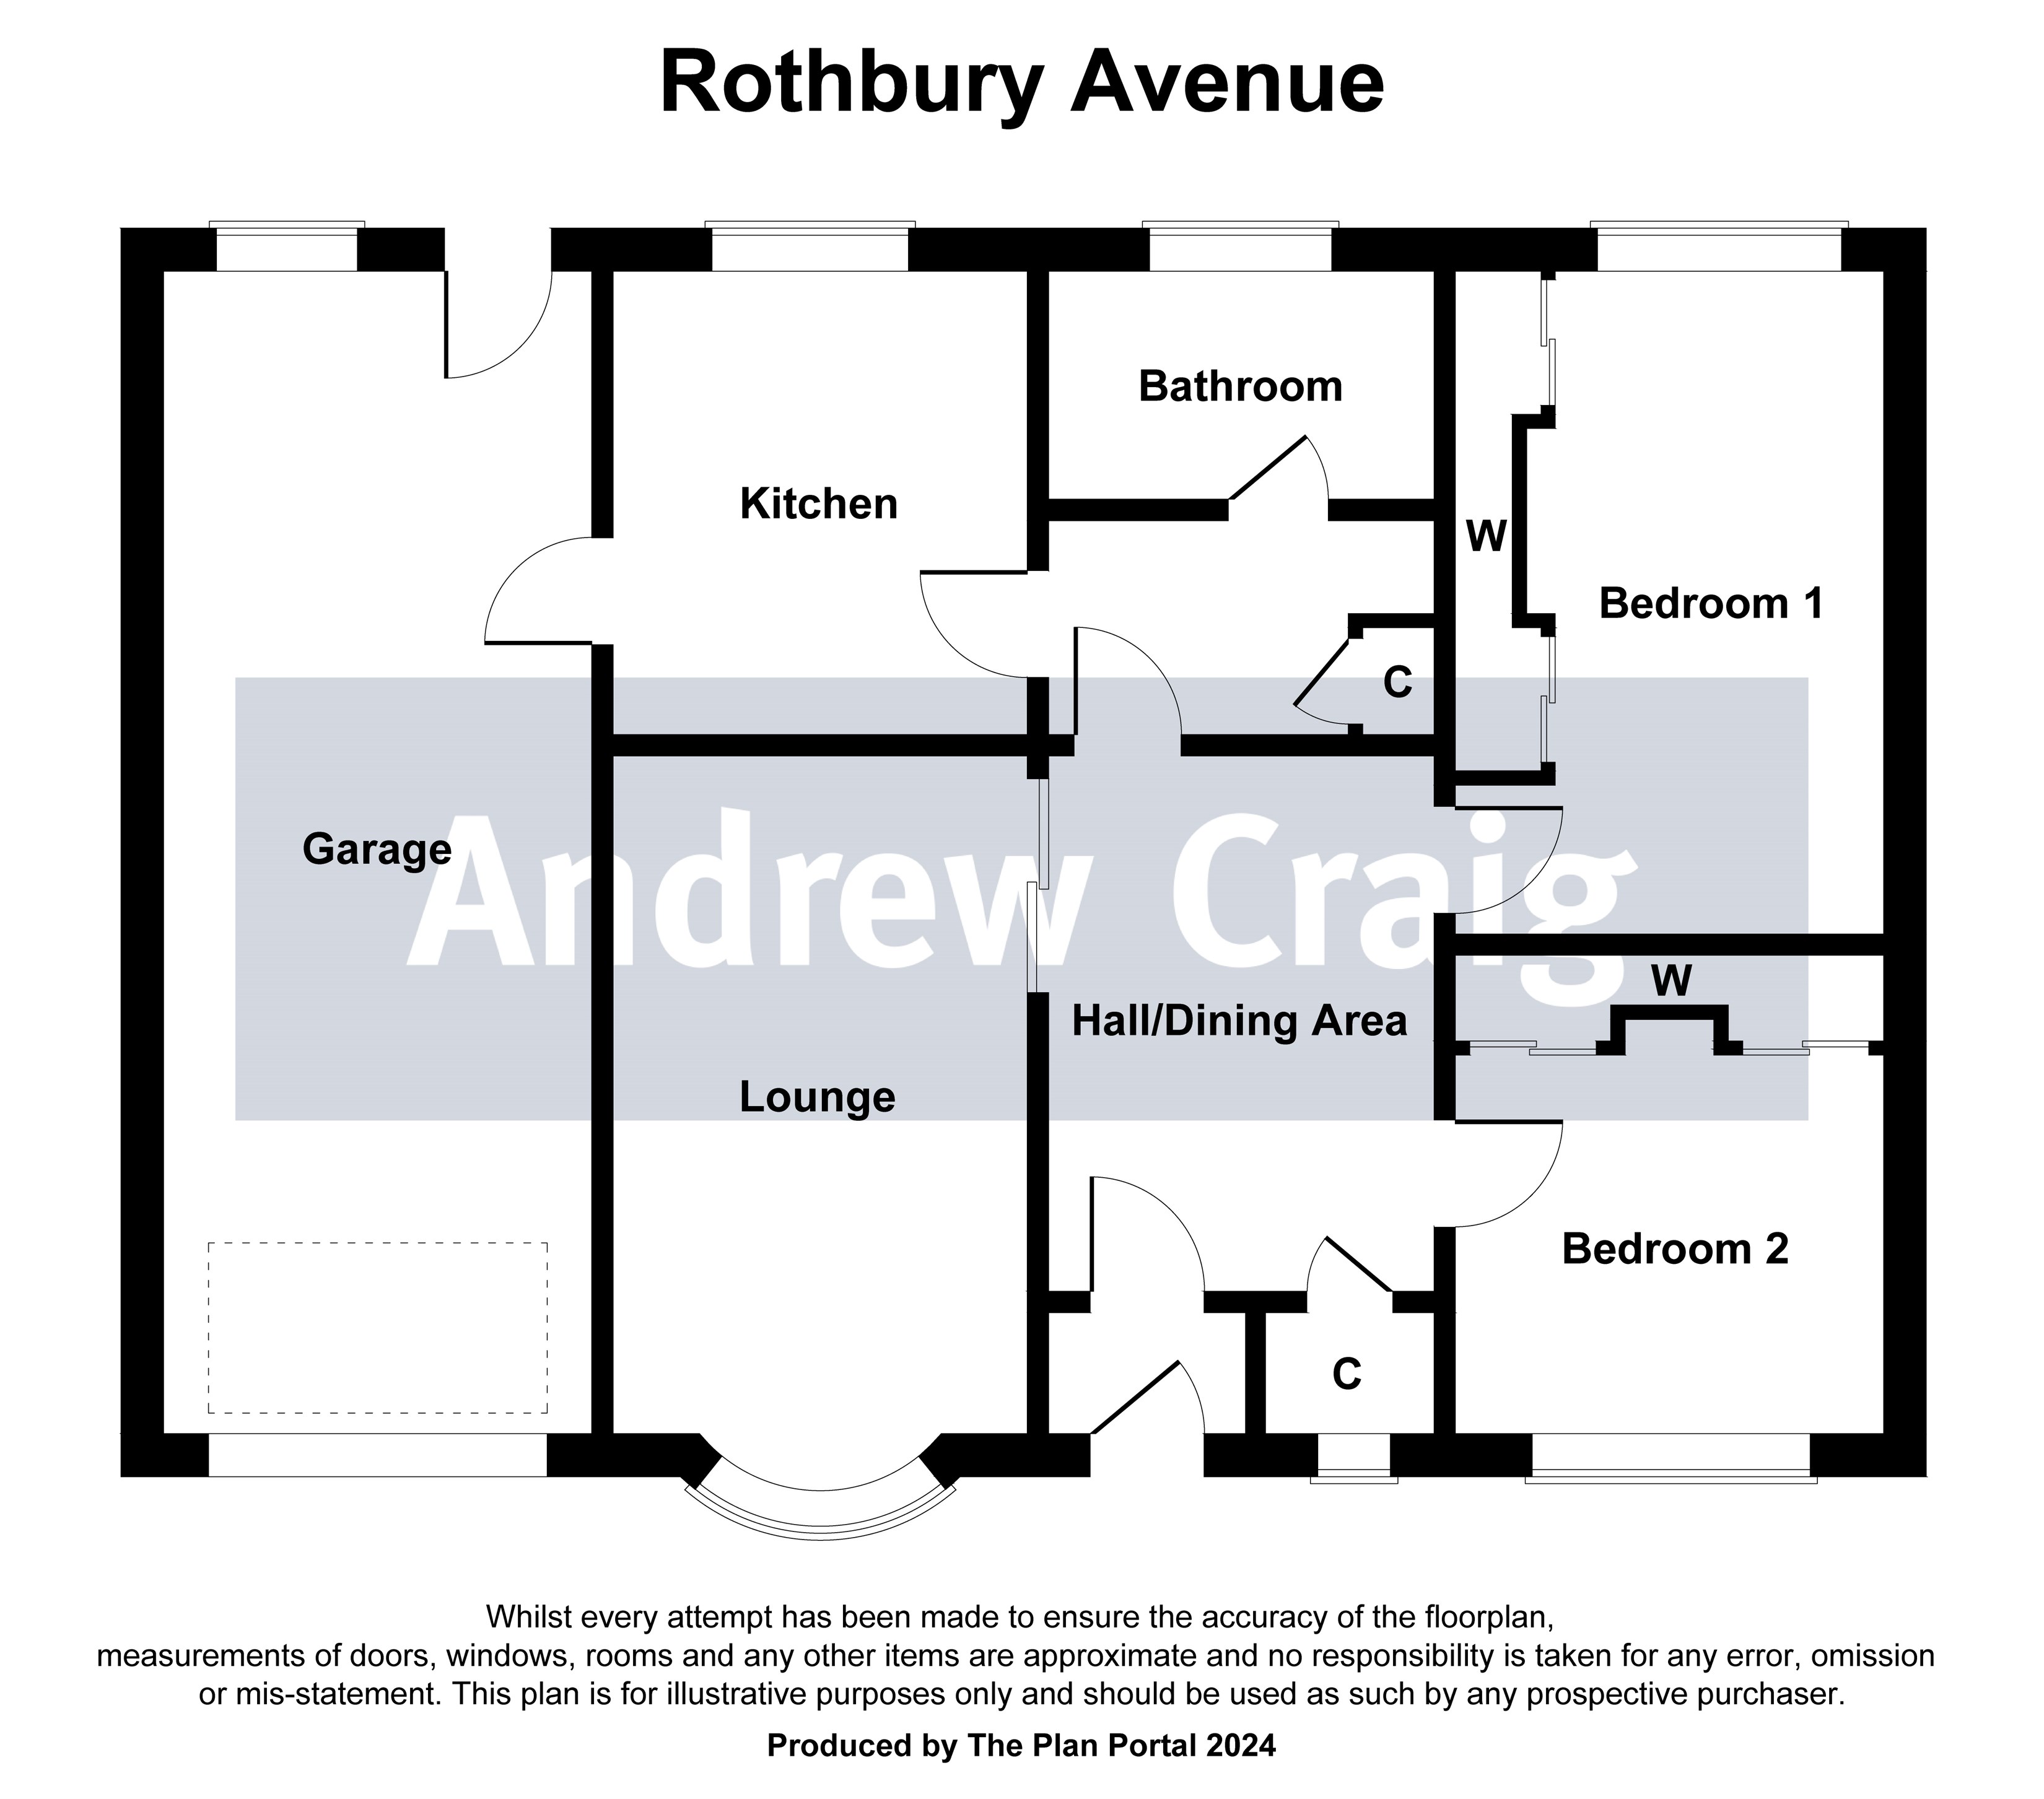 2 bed semi-detached bungalow for sale in Rothbury Avenue, Gosforth - Property floorplan